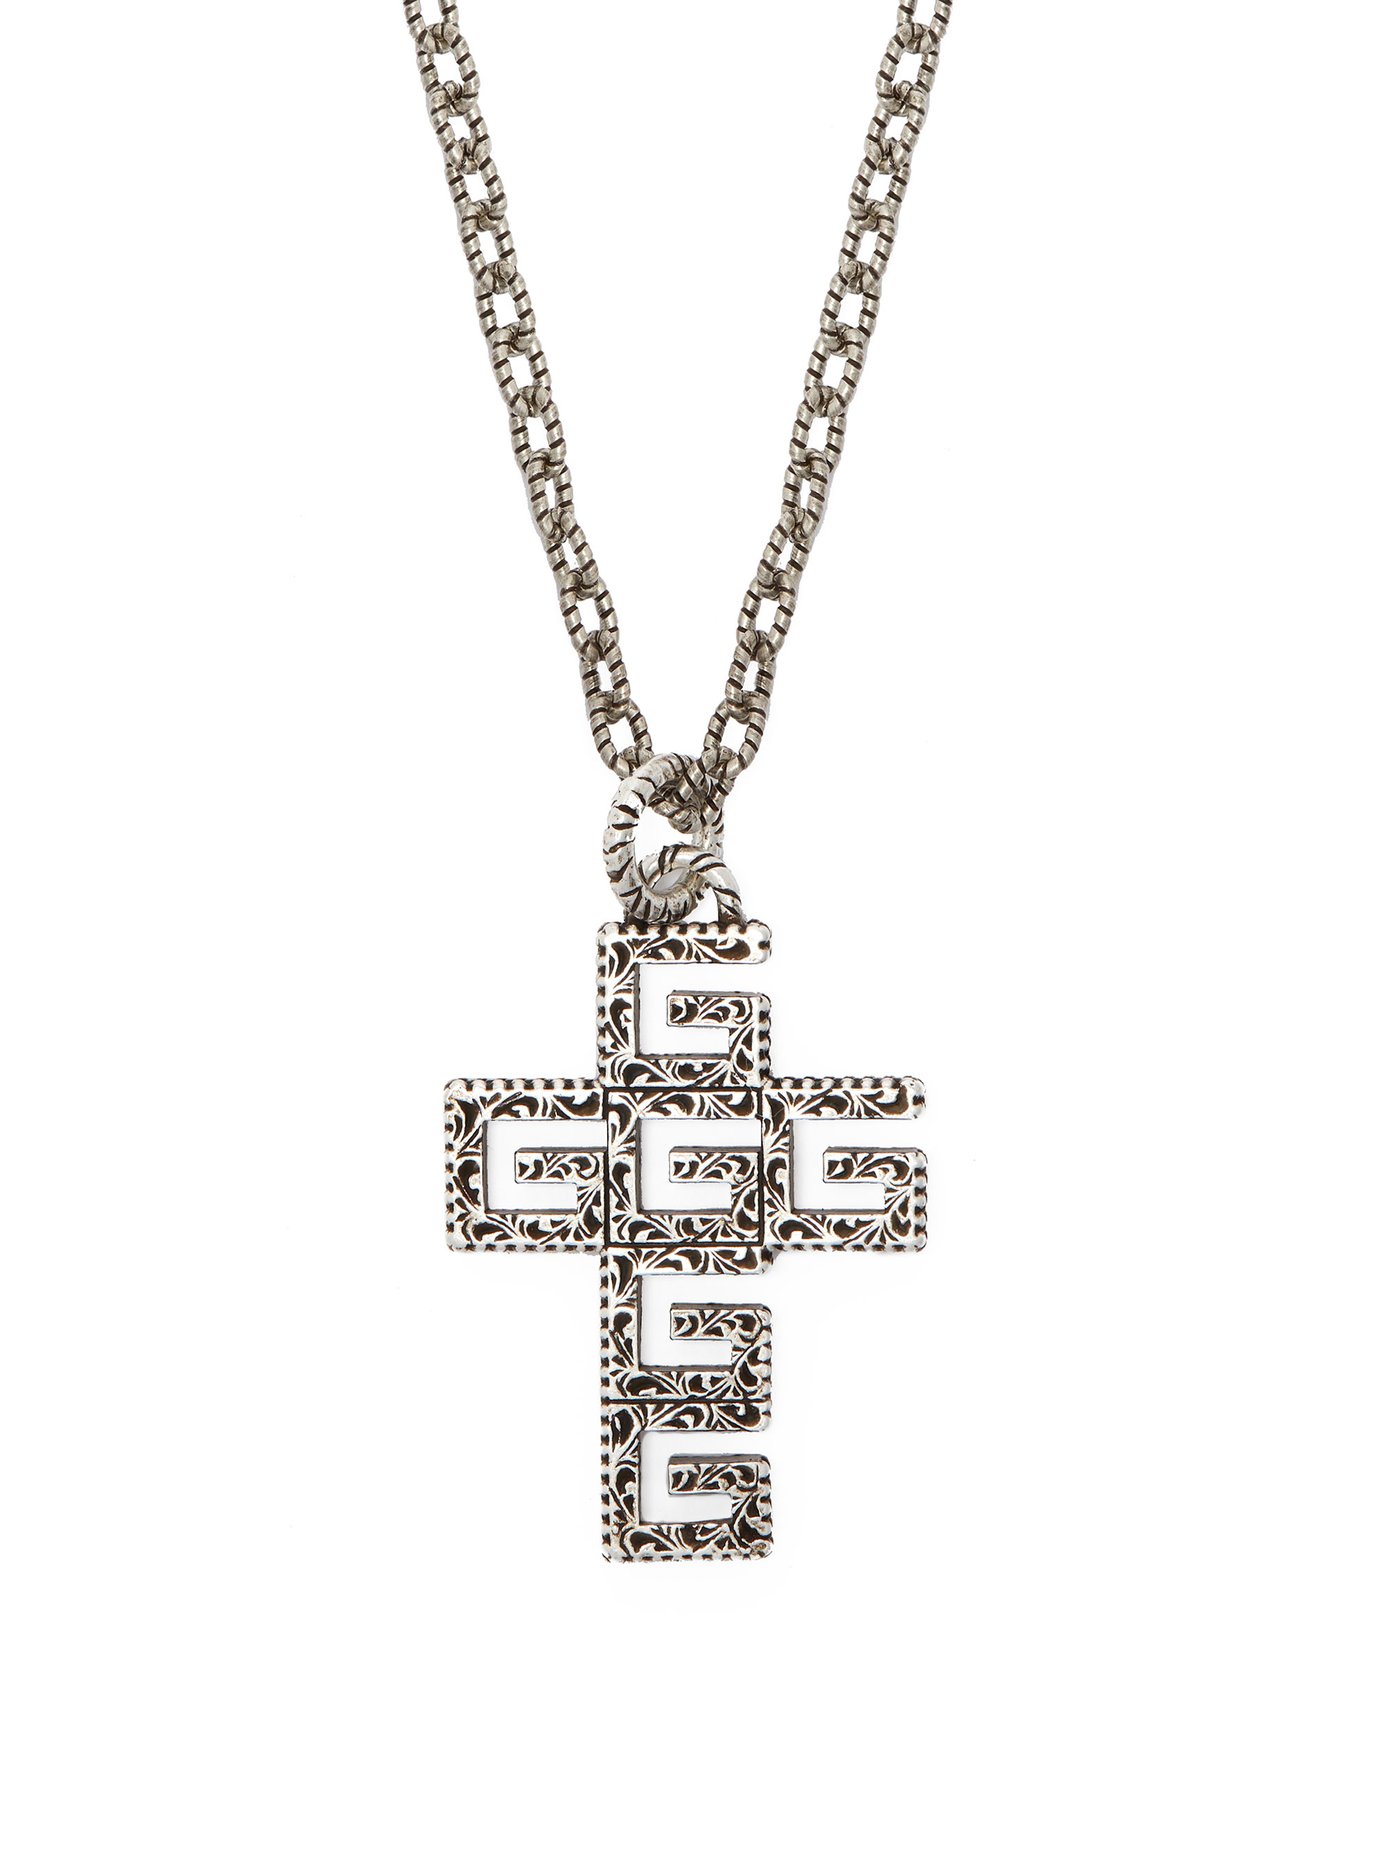 G-cross sterling silver necklace 